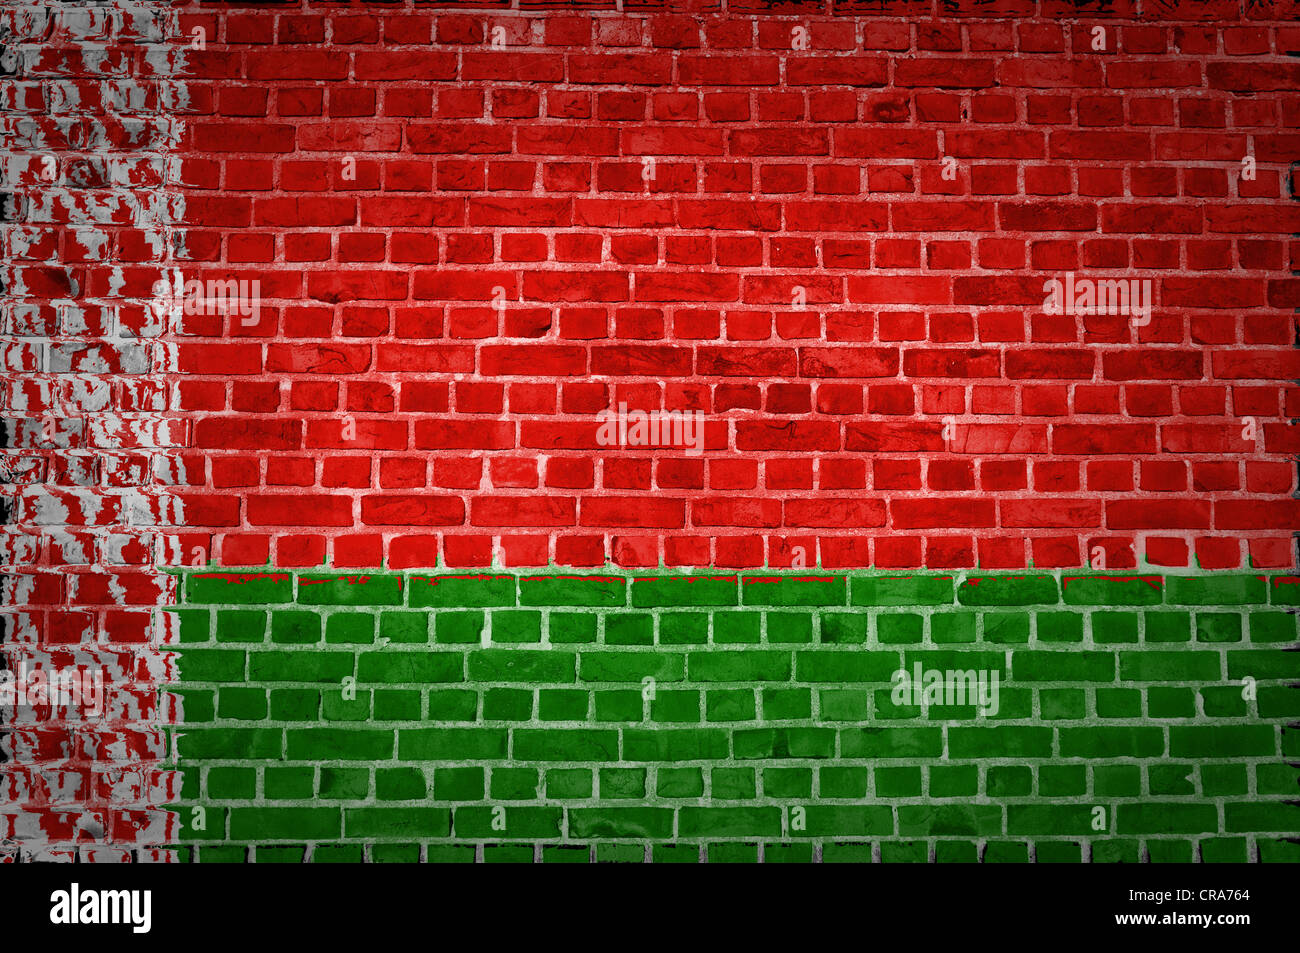 An image of the Belarus flag painted on a brick wall in an urban location Stock Photo